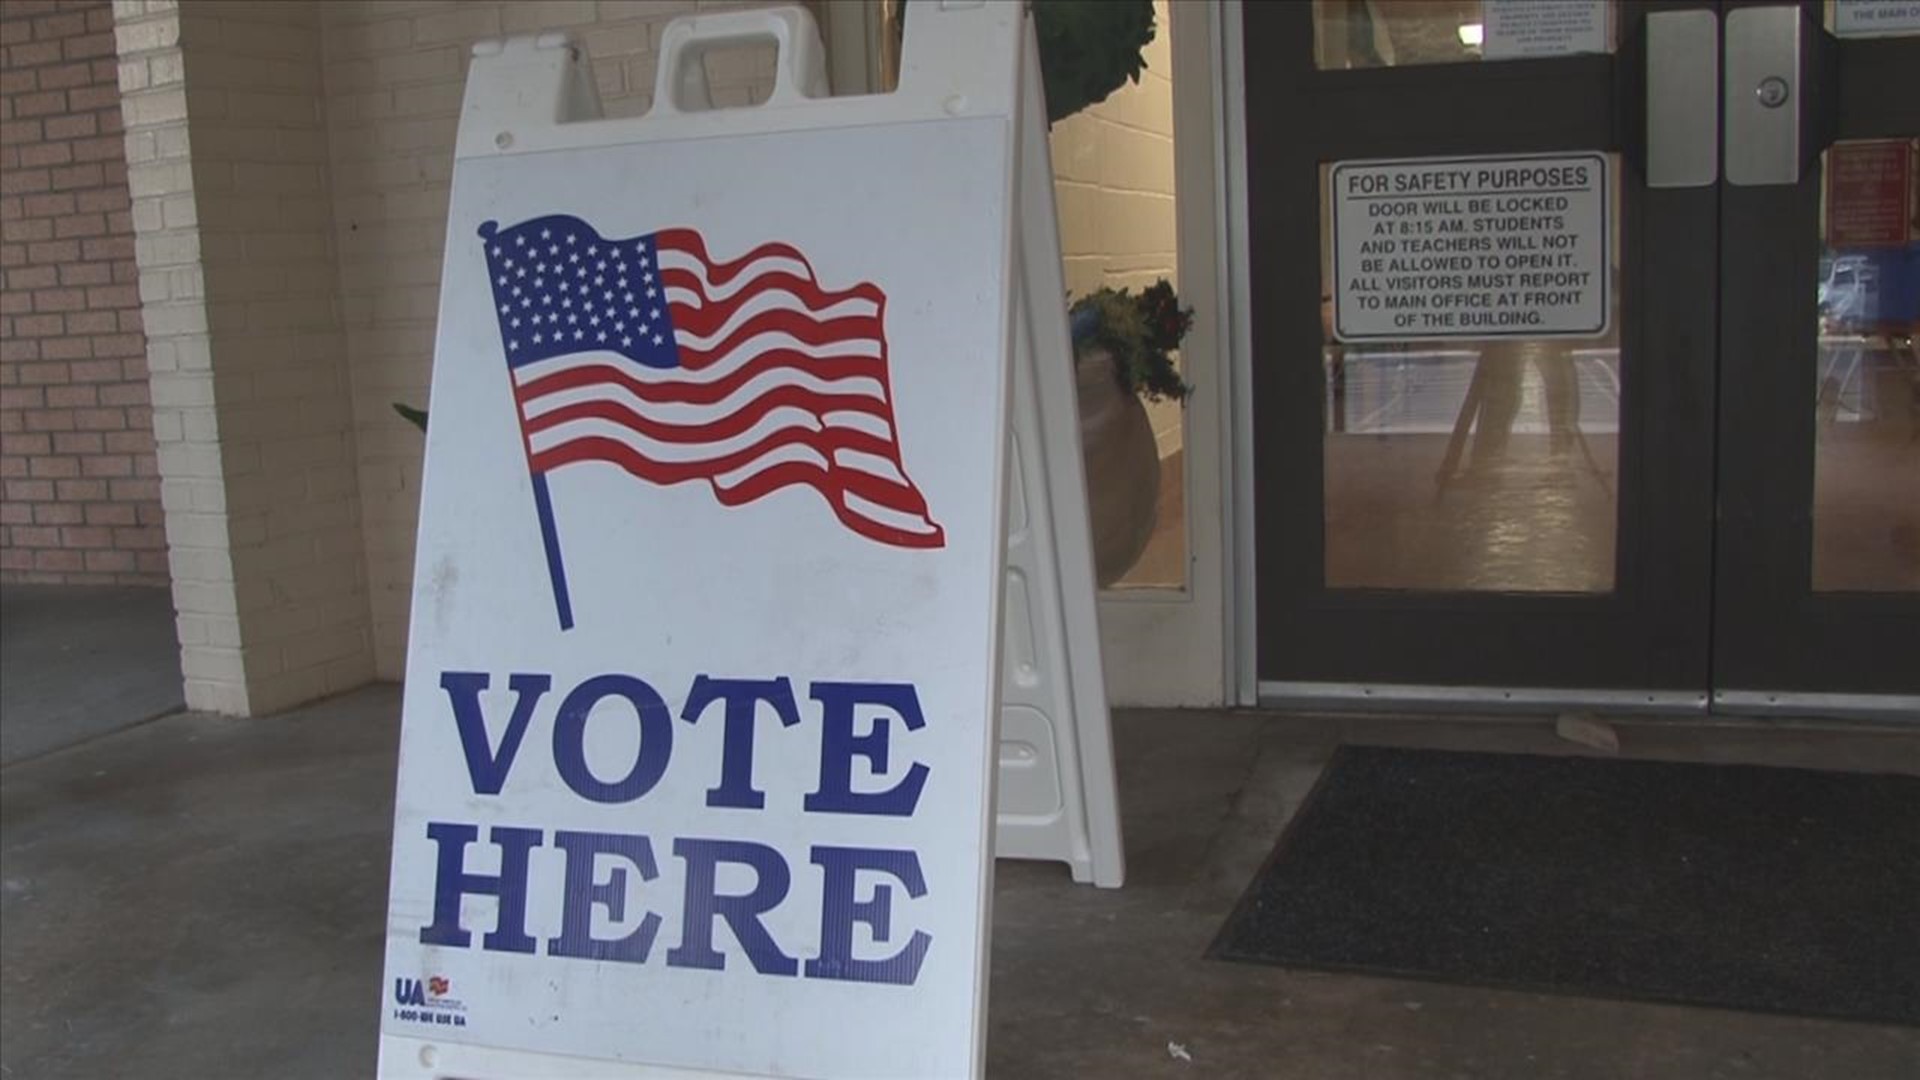 Election season has hit the triad earlier than many other places. Will you need to show ID thanks to a new law?